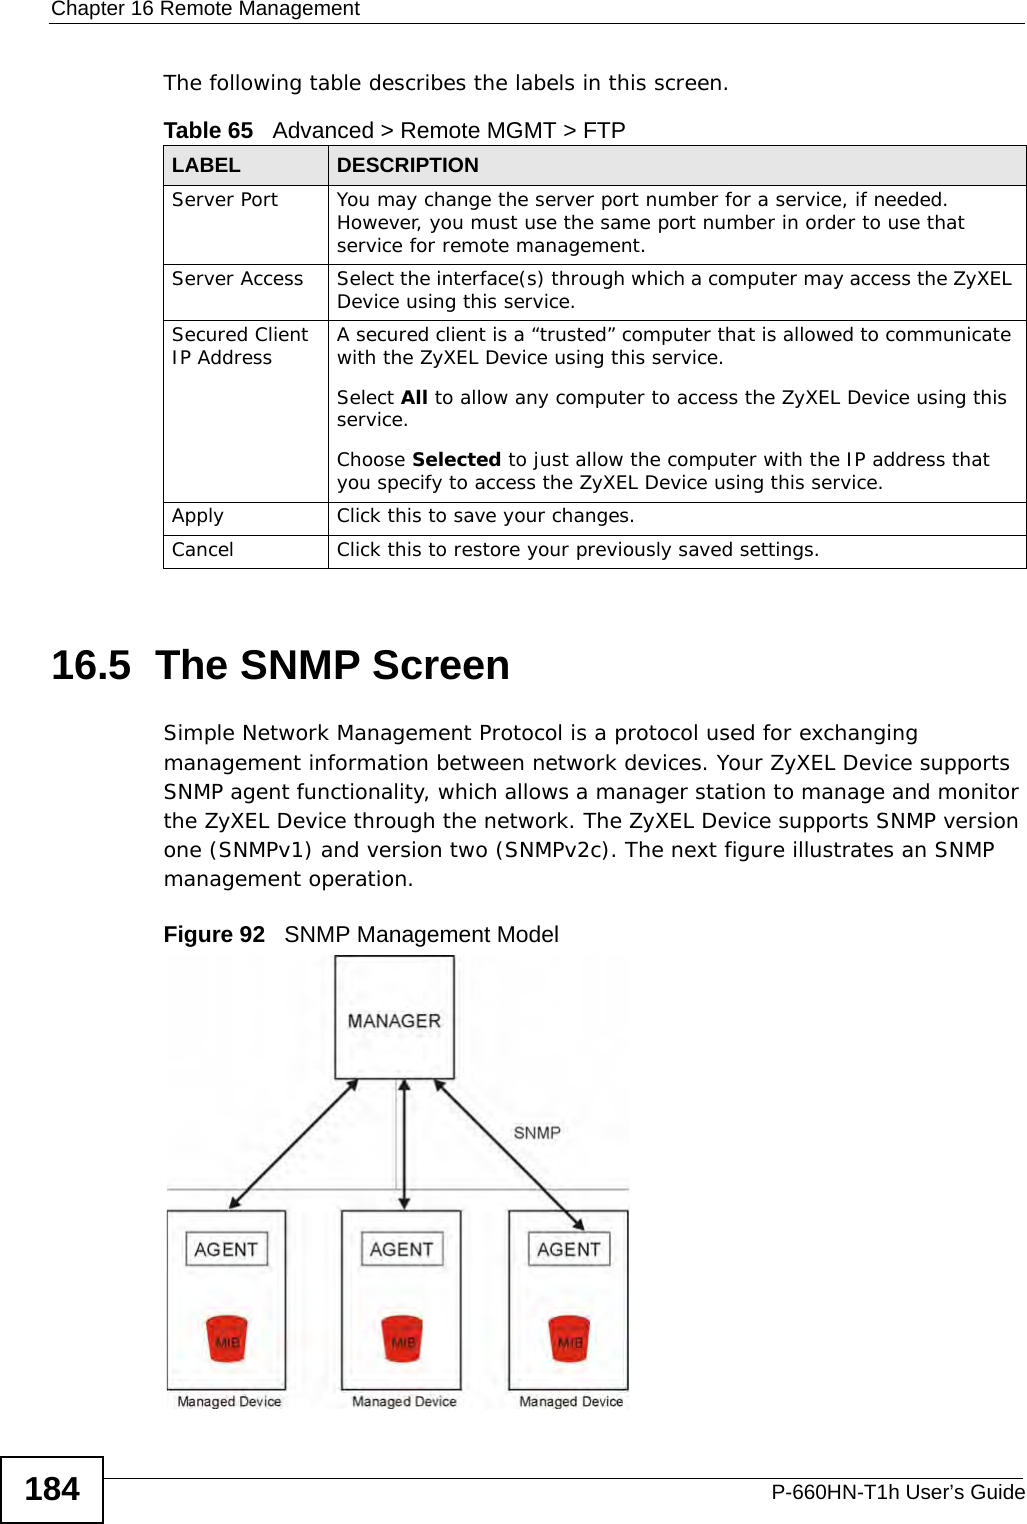 Chapter 16 Remote ManagementP-660HN-T1h User’s Guide184The following table describes the labels in this screen. 16.5  The SNMP ScreenSimple Network Management Protocol is a protocol used for exchanging management information between network devices. Your ZyXEL Device supports SNMP agent functionality, which allows a manager station to manage and monitor the ZyXEL Device through the network. The ZyXEL Device supports SNMP version one (SNMPv1) and version two (SNMPv2c). The next figure illustrates an SNMP management operation.Figure 92   SNMP Management ModelTable 65   Advanced &gt; Remote MGMT &gt; FTPLABEL DESCRIPTIONServer Port You may change the server port number for a service, if needed. However, you must use the same port number in order to use that service for remote management.Server Access Select the interface(s) through which a computer may access the ZyXEL Device using this service.Secured Client IP Address A secured client is a “trusted” computer that is allowed to communicate with the ZyXEL Device using this service. Select All to allow any computer to access the ZyXEL Device using this service.Choose Selected to just allow the computer with the IP address that you specify to access the ZyXEL Device using this service.Apply Click this to save your changes.Cancel Click this to restore your previously saved settings.